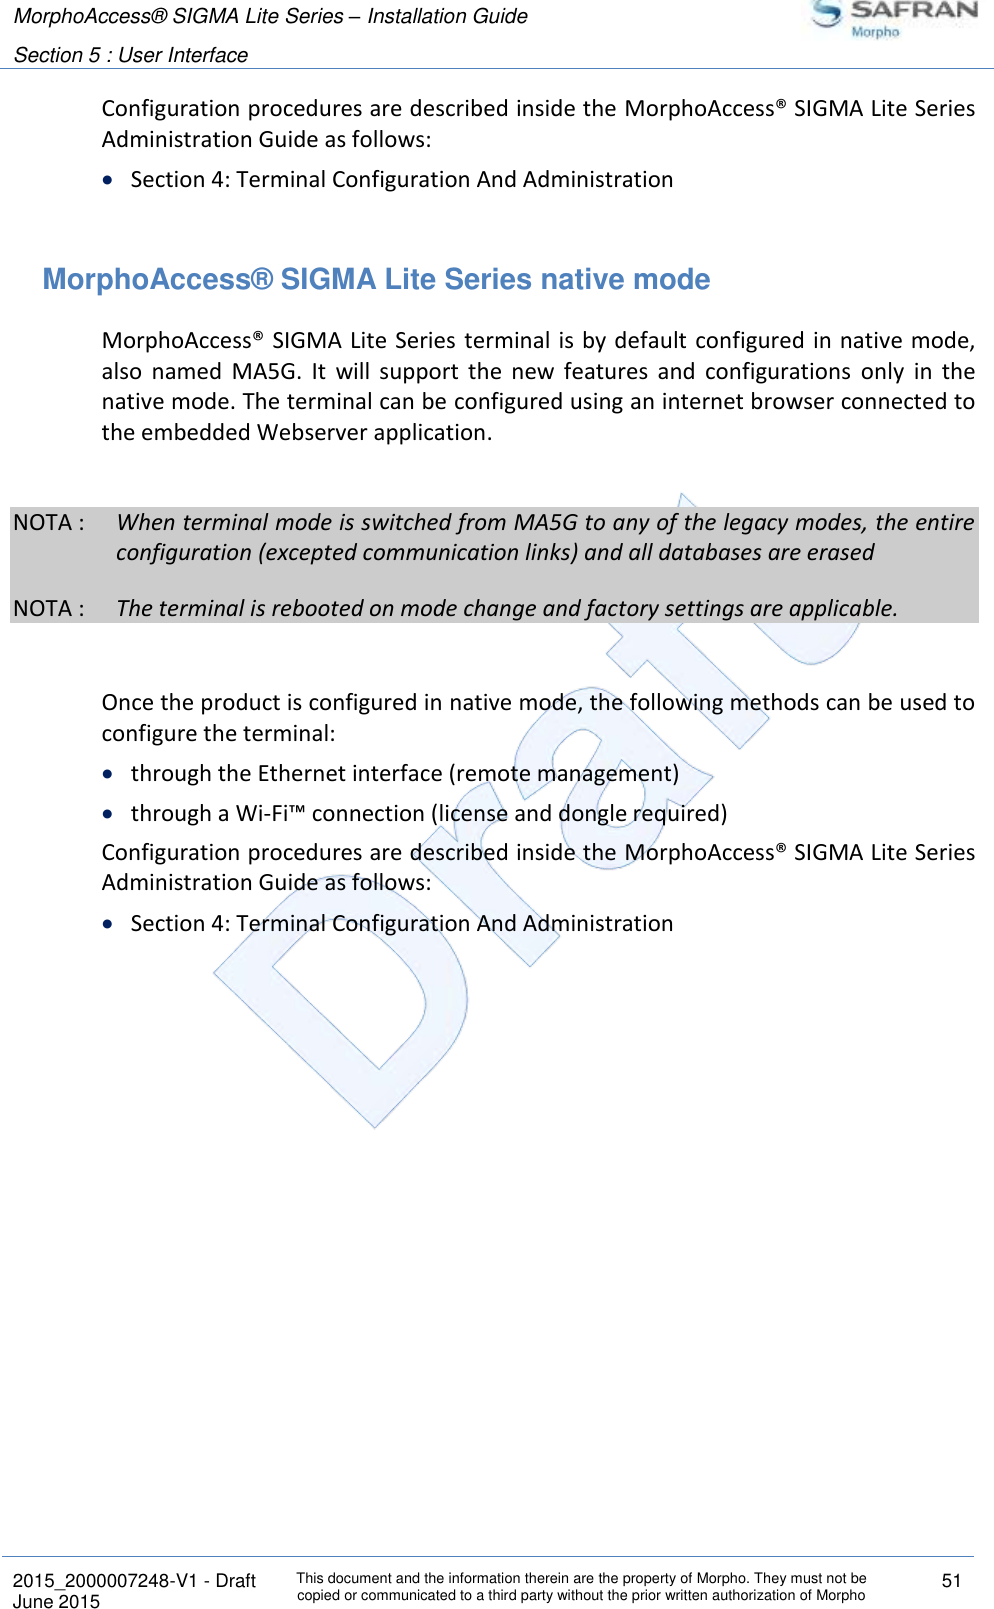 MorphoAccess® SIGMA Lite Series – Installation Guide  Section 5 : User Interface   2015_2000007248-V1 - Draft This document and the information therein are the property of Morpho. They must not be copied or communicated to a third party without the prior written authorization of Morpho 51 June 2015   Configuration procedures are described inside the MorphoAccess® SIGMA Lite Series Administration Guide as follows:  Section 4: Terminal Configuration And Administration  MorphoAccess® SIGMA Lite Series native mode MorphoAccess® SIGMA Lite Series terminal is by default configured in native mode, also  named  MA5G.  It  will  support  the  new  features  and  configurations  only  in  the native mode. The terminal can be configured using an internet browser connected to the embedded Webserver application.  NOTA :  When terminal mode is switched from MA5G to any of the legacy modes, the entire configuration (excepted communication links) and all databases are erased NOTA :  The terminal is rebooted on mode change and factory settings are applicable.  Once the product is configured in native mode, the following methods can be used to configure the terminal:  through the Ethernet interface (remote management)  through a Wi-Fi™ connection (license and dongle required) Configuration procedures are described inside the MorphoAccess® SIGMA Lite Series Administration Guide as follows:  Section 4: Terminal Configuration And Administration  